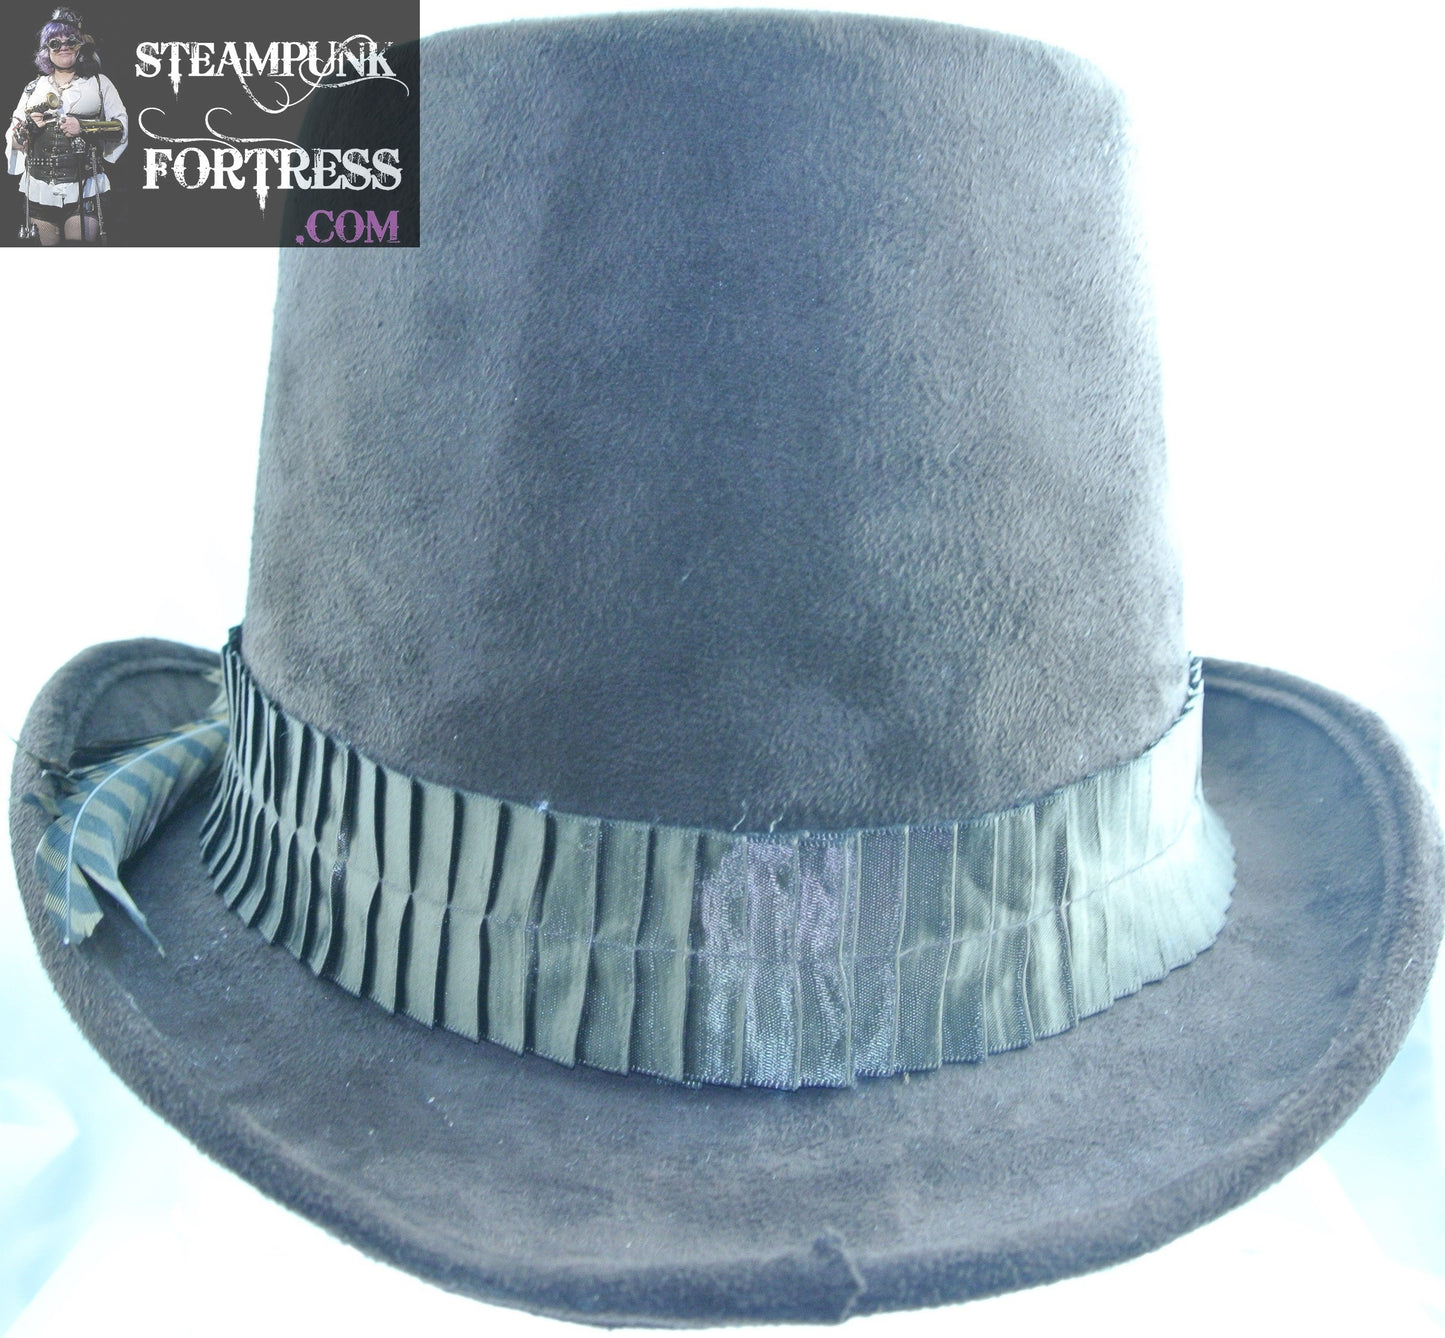 BROWN PHEASANT BIRD BROWN DOUBLE FOLD PLEATED SATIN BAND BROWN 2XL XXL FULL SIZE TOP HAT STARR WILDE STEAMPUNK FORTRESS